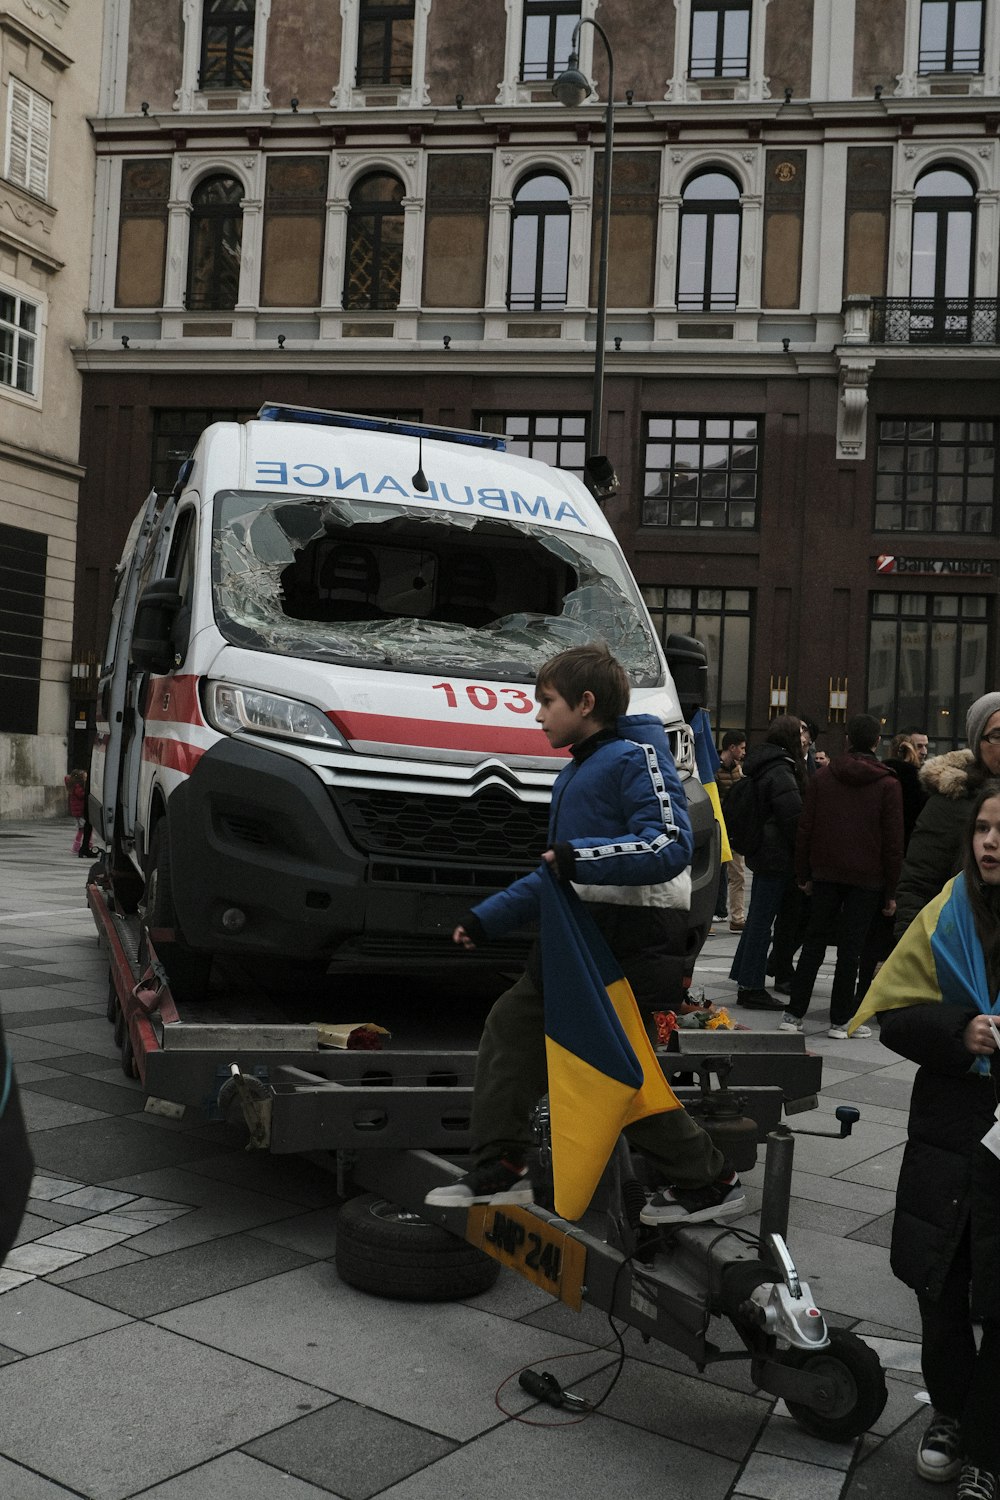 a man sitting on a bike in front of an ambulance